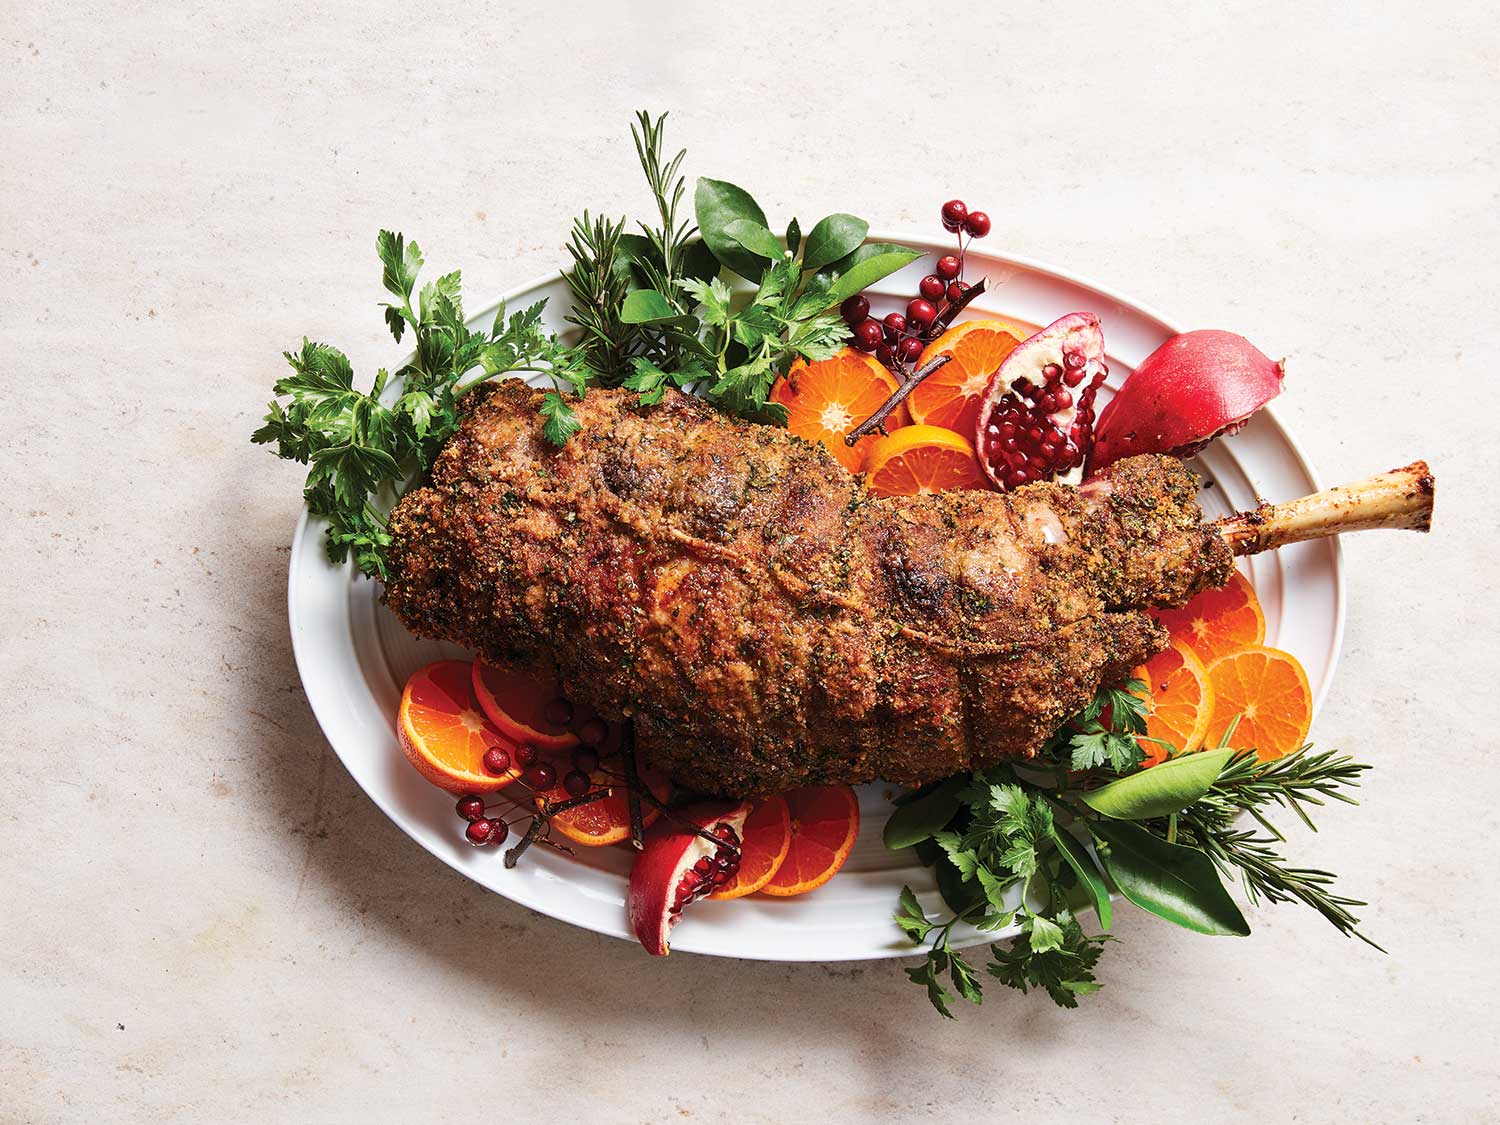 wake-up-your-leg-of-lamb-with-the-hot-numbing-flavors-of-sichuan-spices